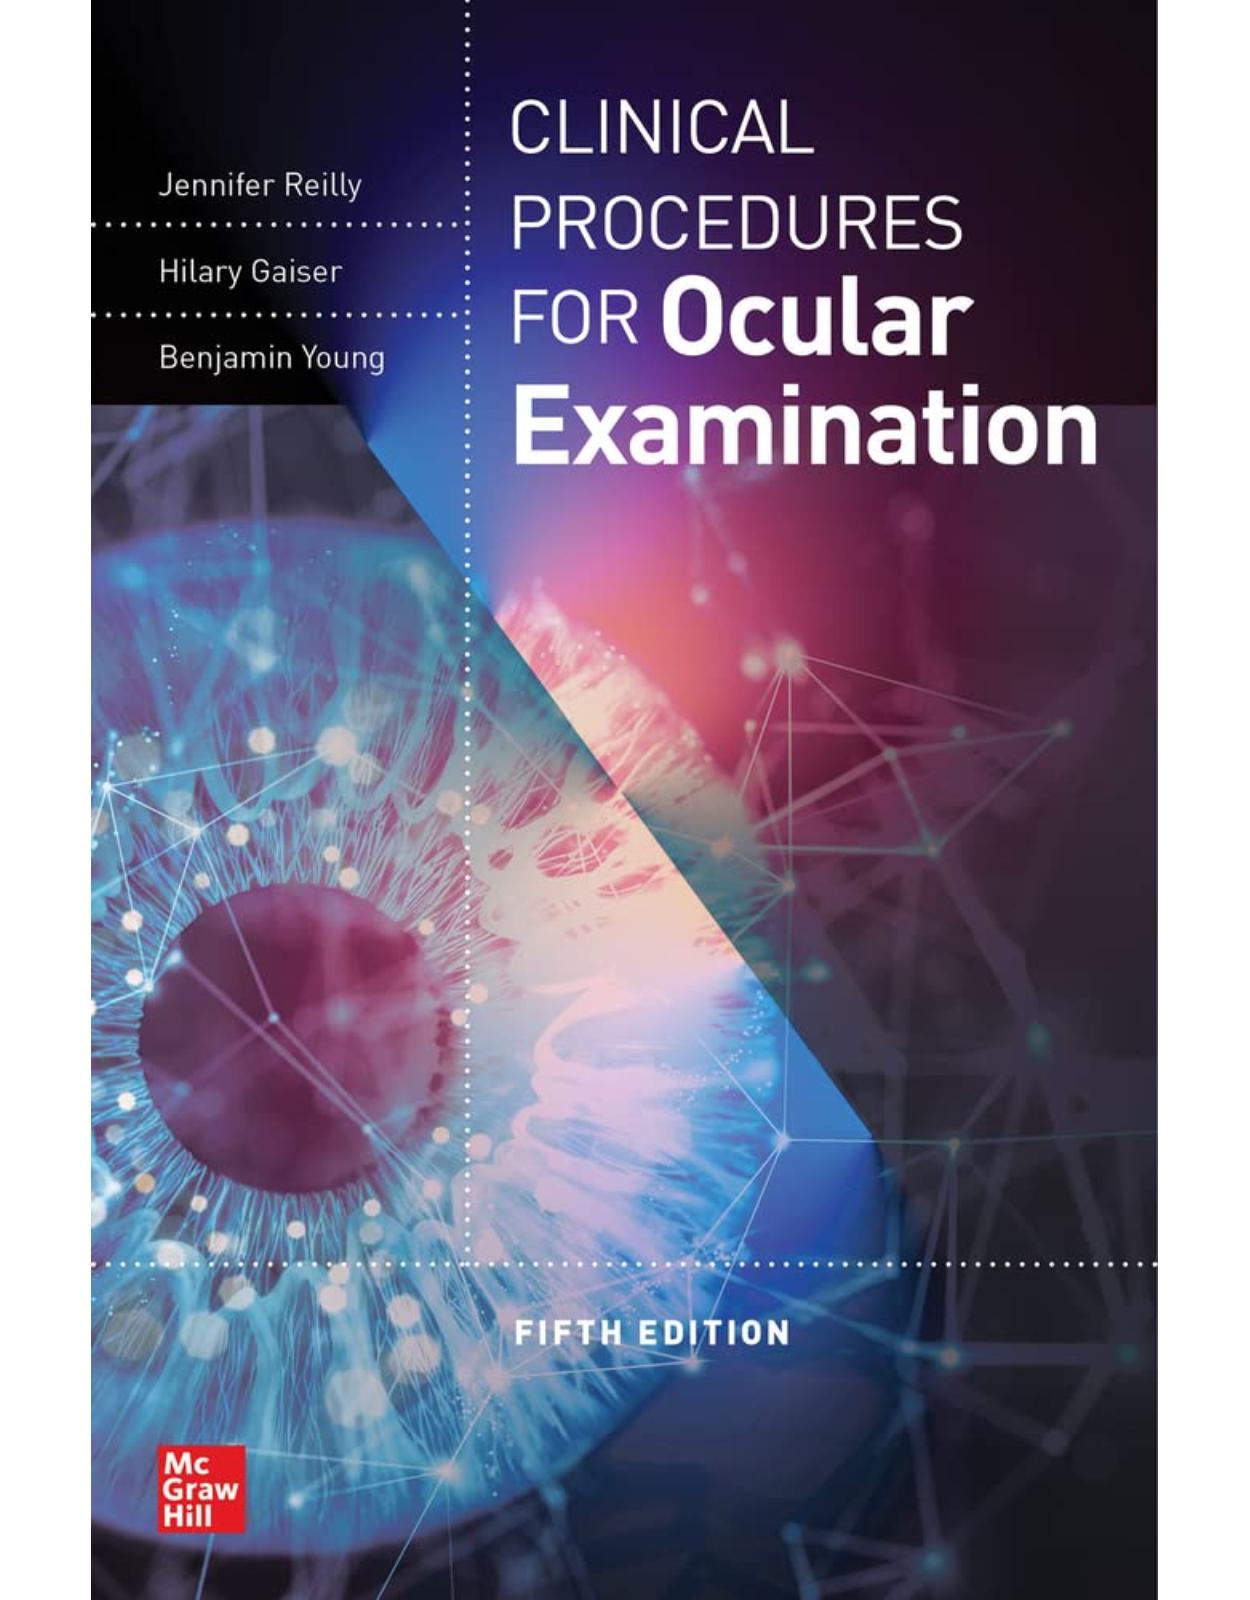 Clinical Procedures For The Ocular Examination, Fifth Edition